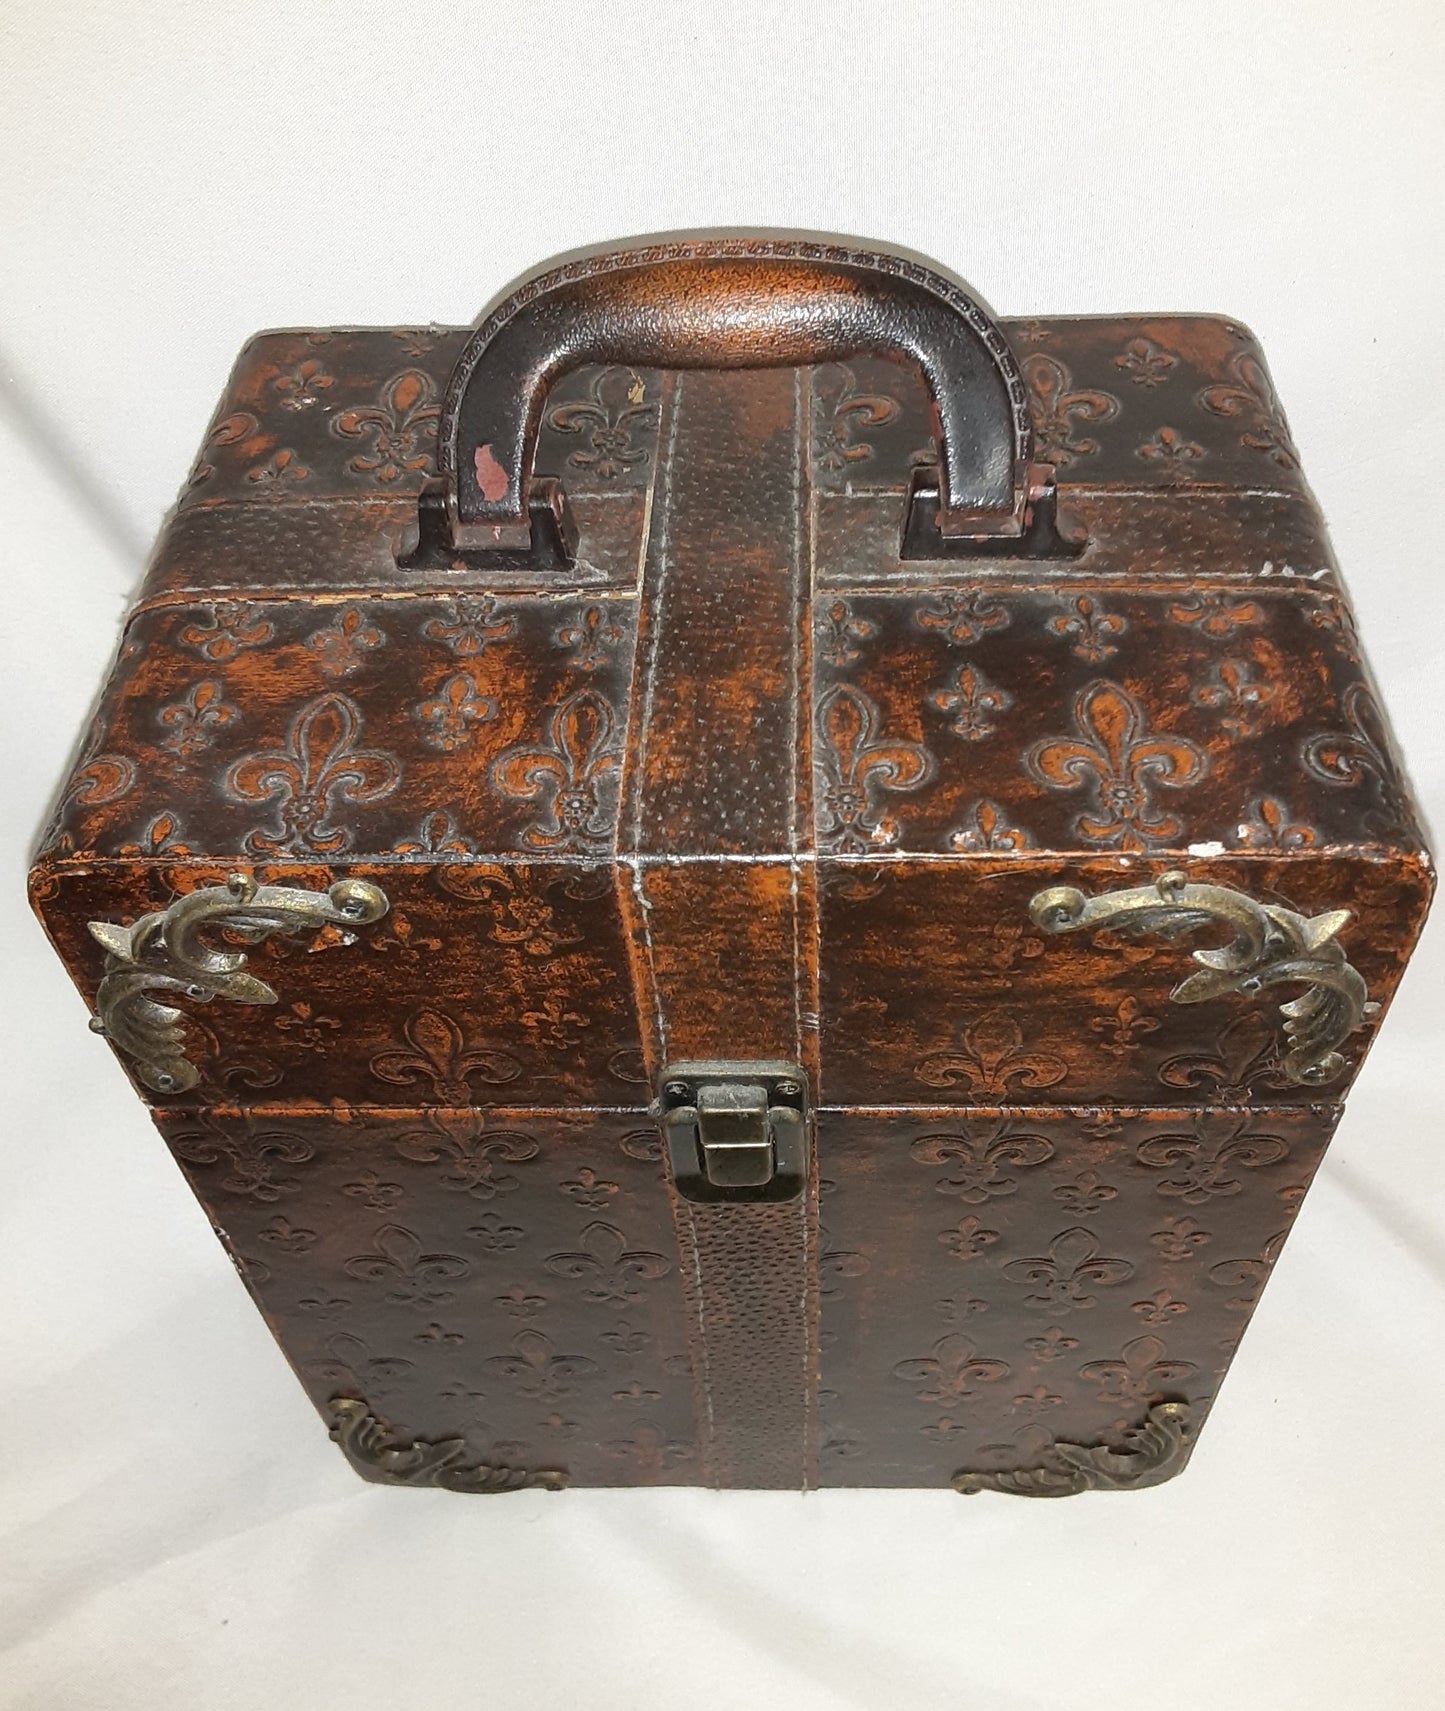 Box - Wood and Faux Leather Small Treasure Chest